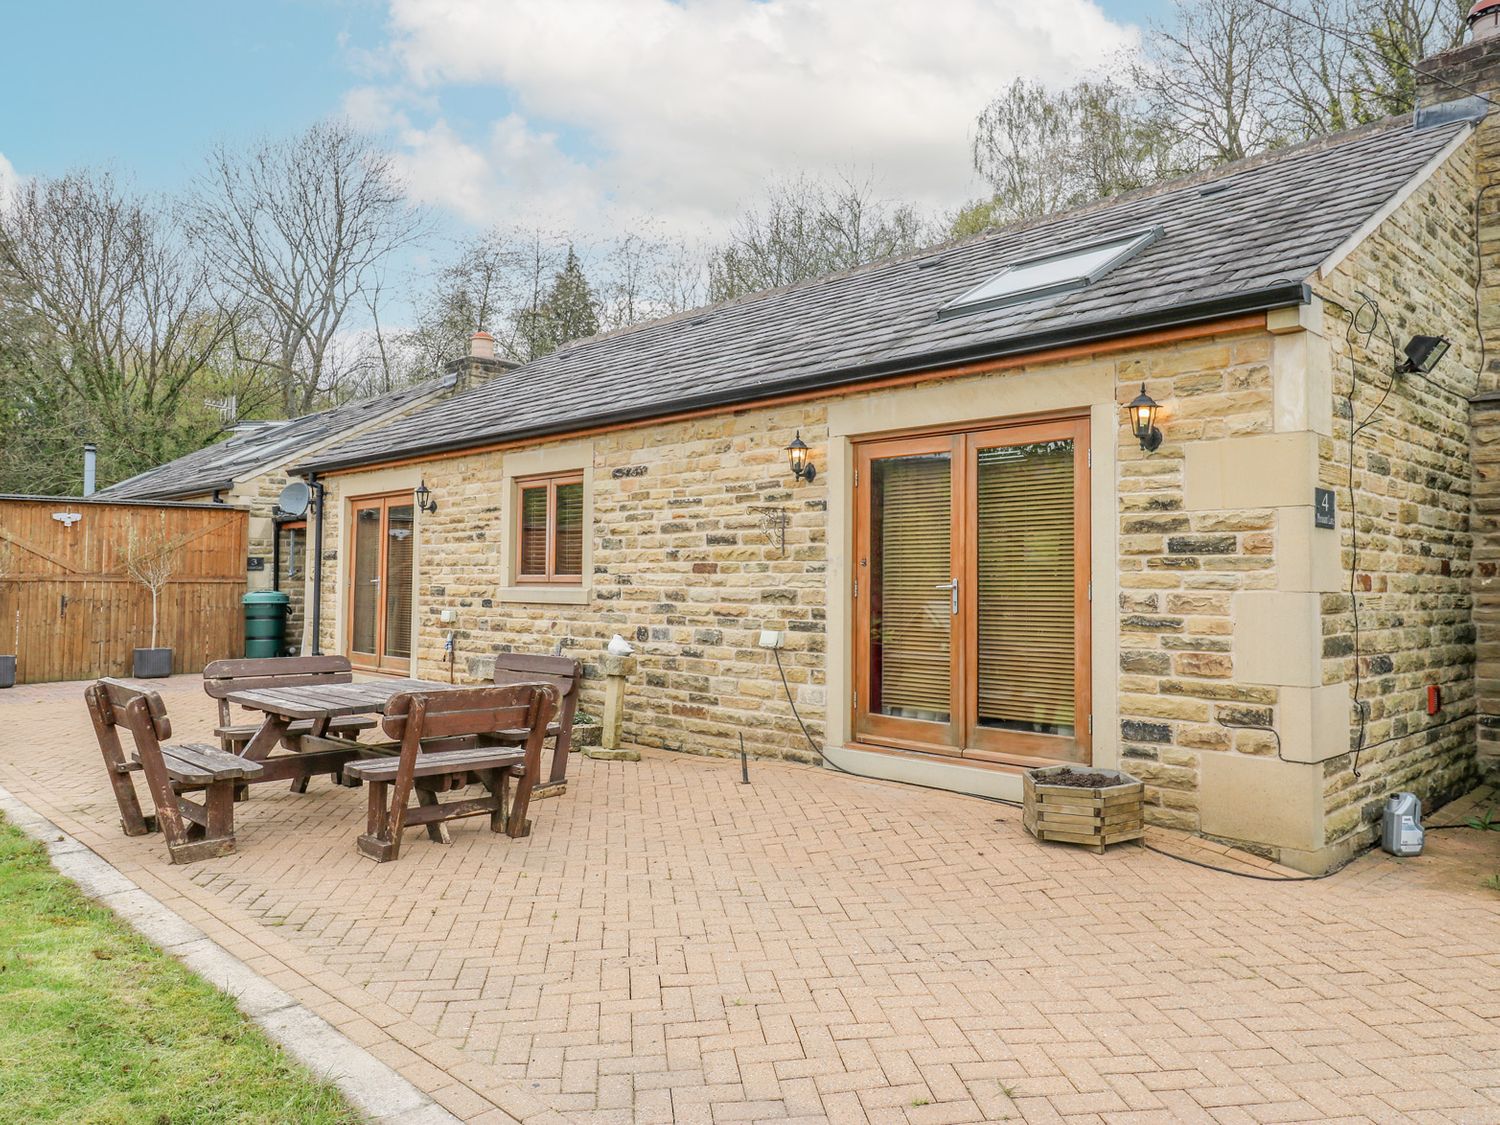 4 Pheasant Lane, is near Stocksbridge, South Yorkshire. Three-bedroom home, with hot tub and garden.